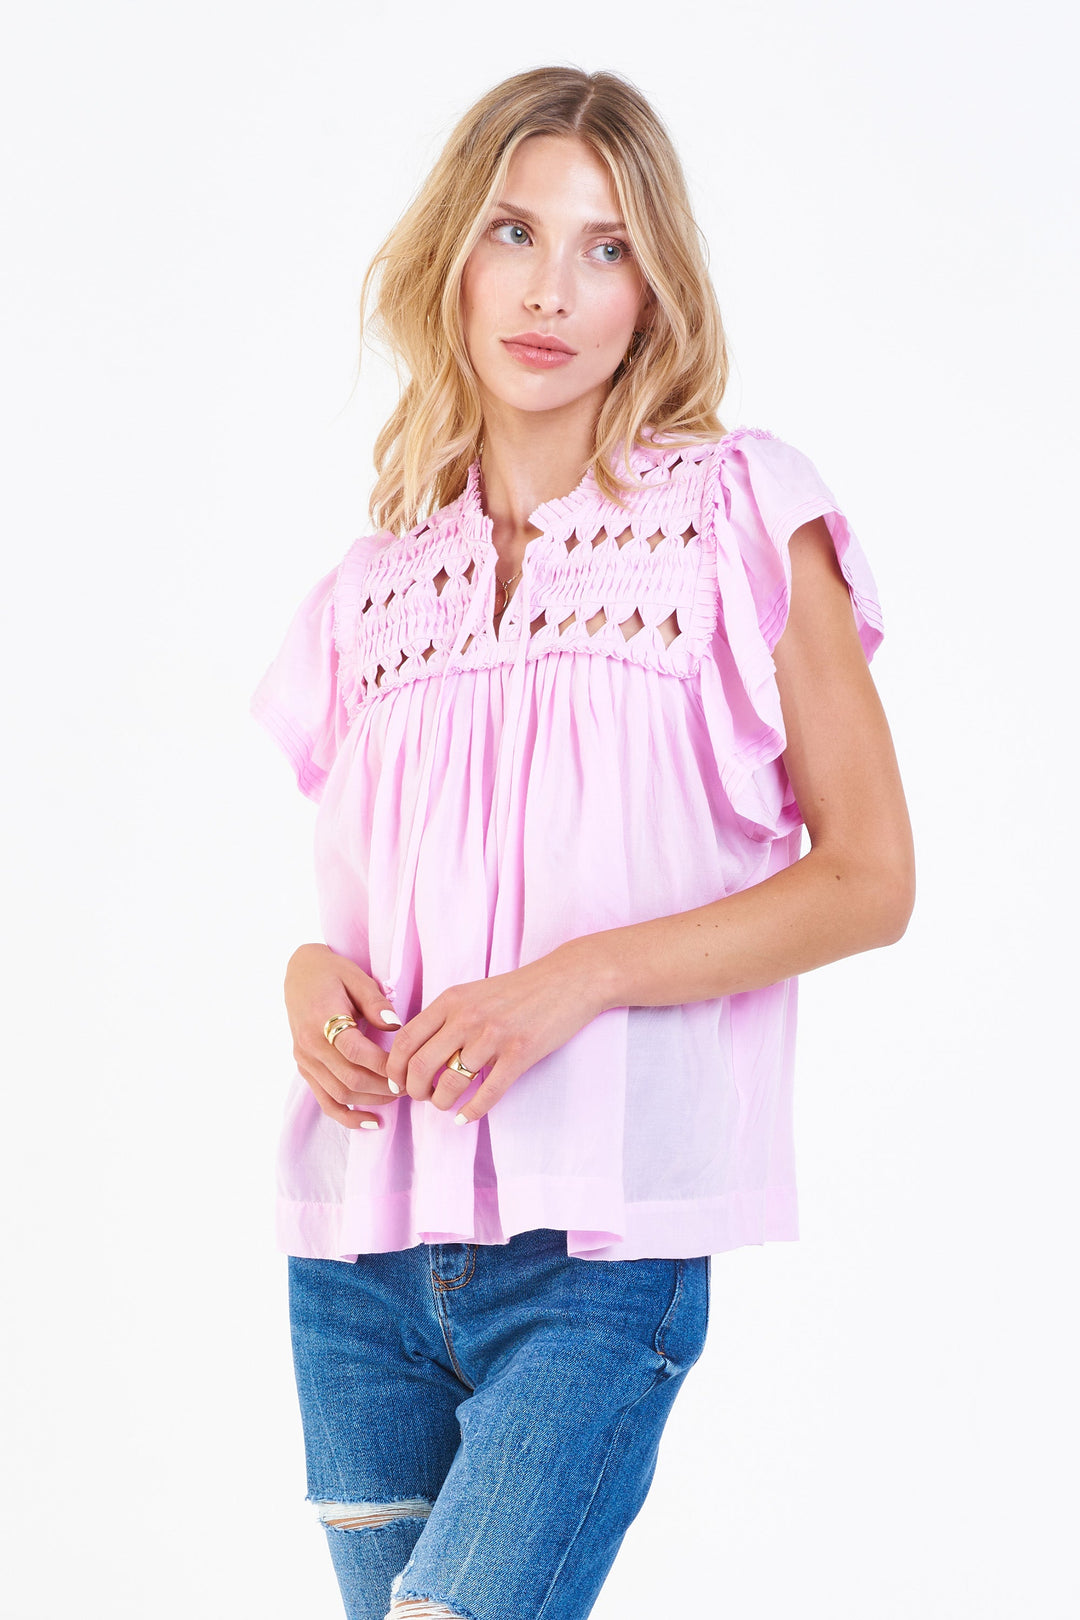 image of a female model wearing a KEZIA KNOTTED EMBROIDERY TOP PINK LAVENDER DEAR JOHN DENIM 